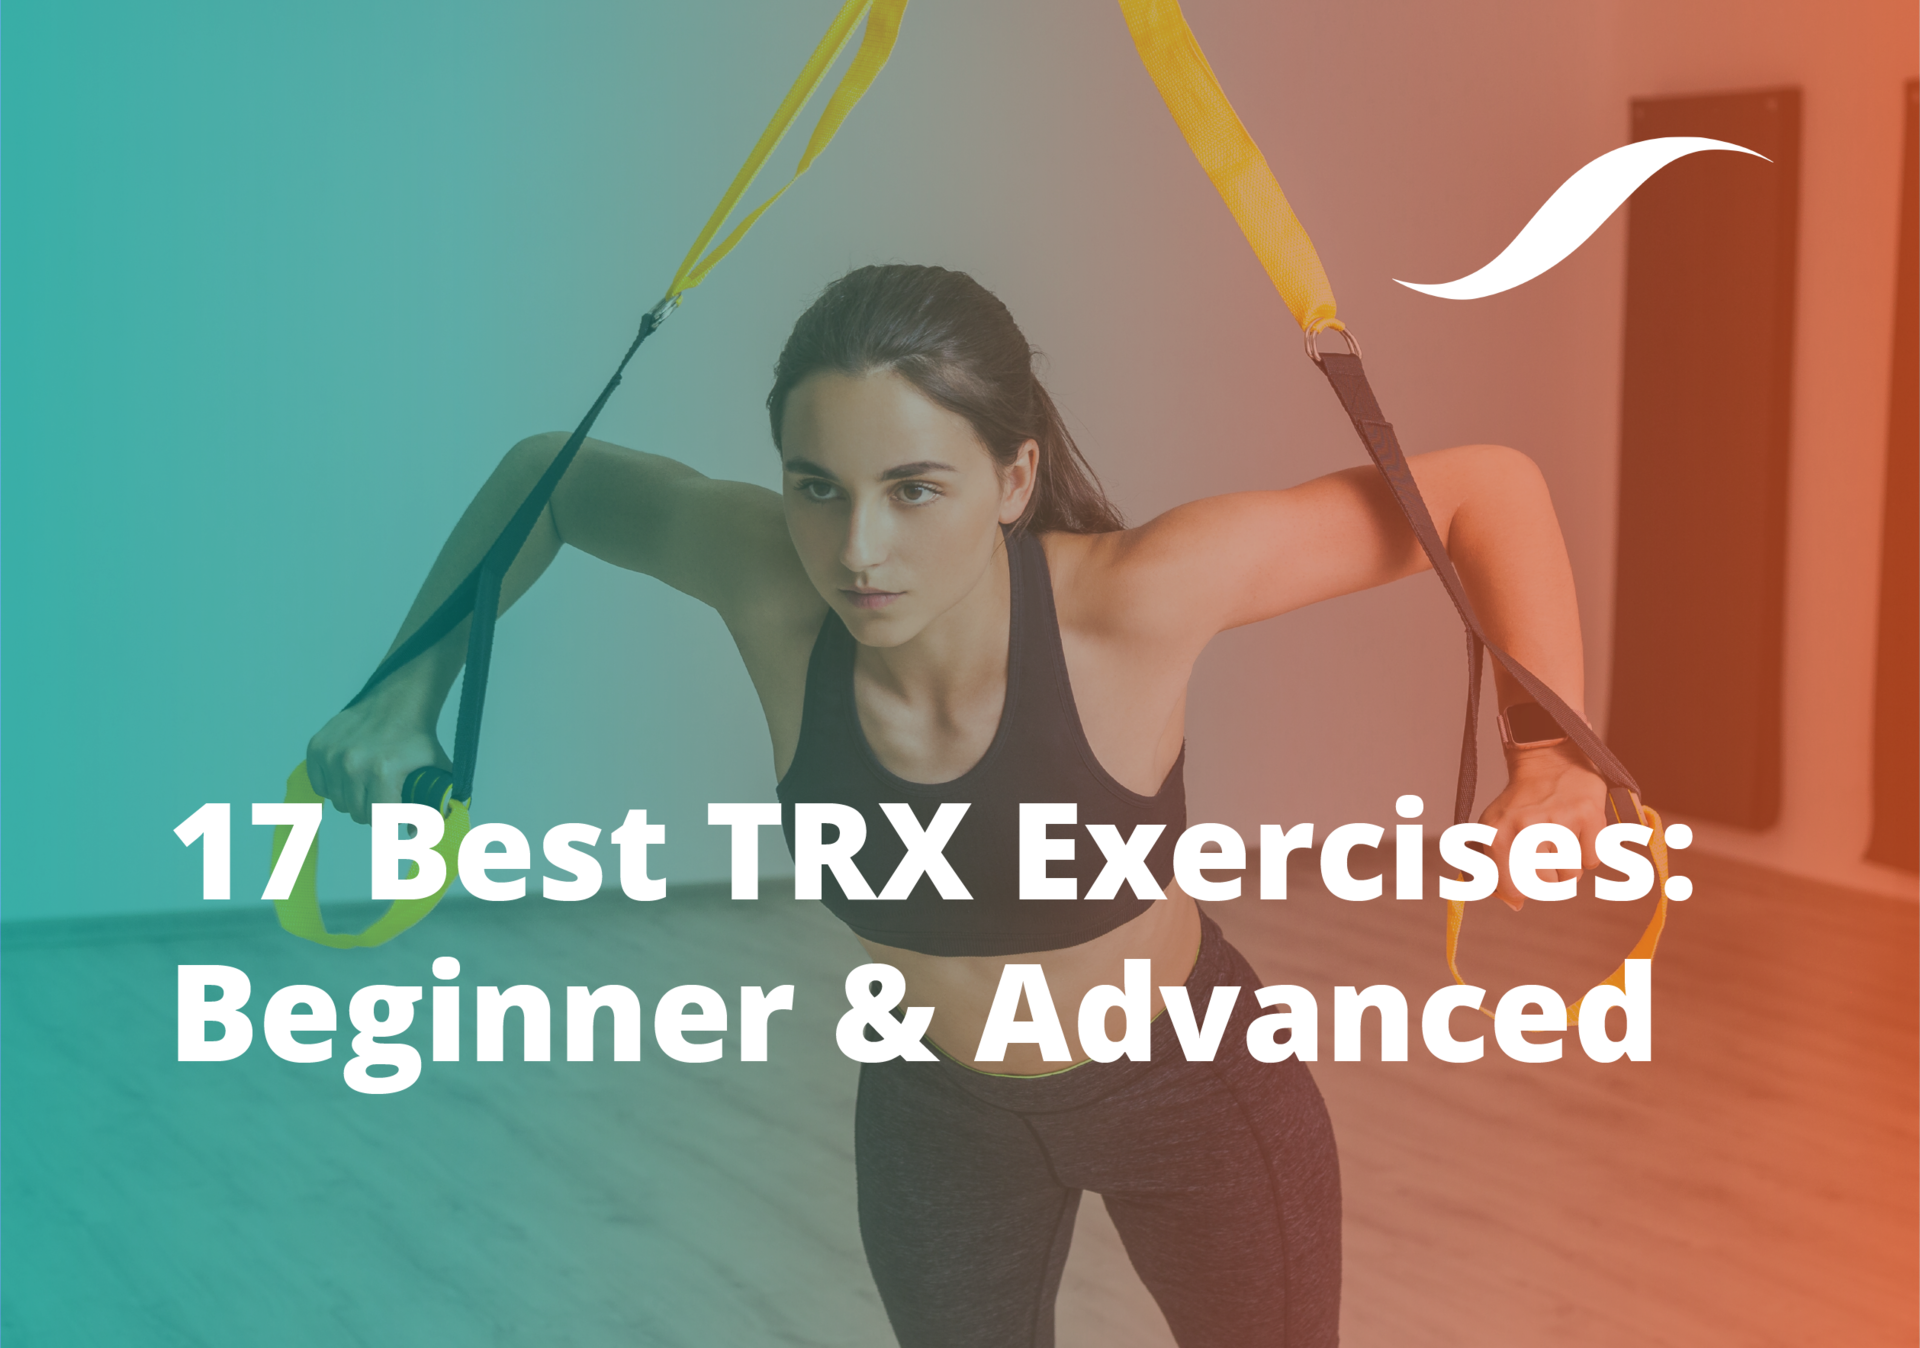 MASTER CLASS: Strength exercises done using TRX straps benefit